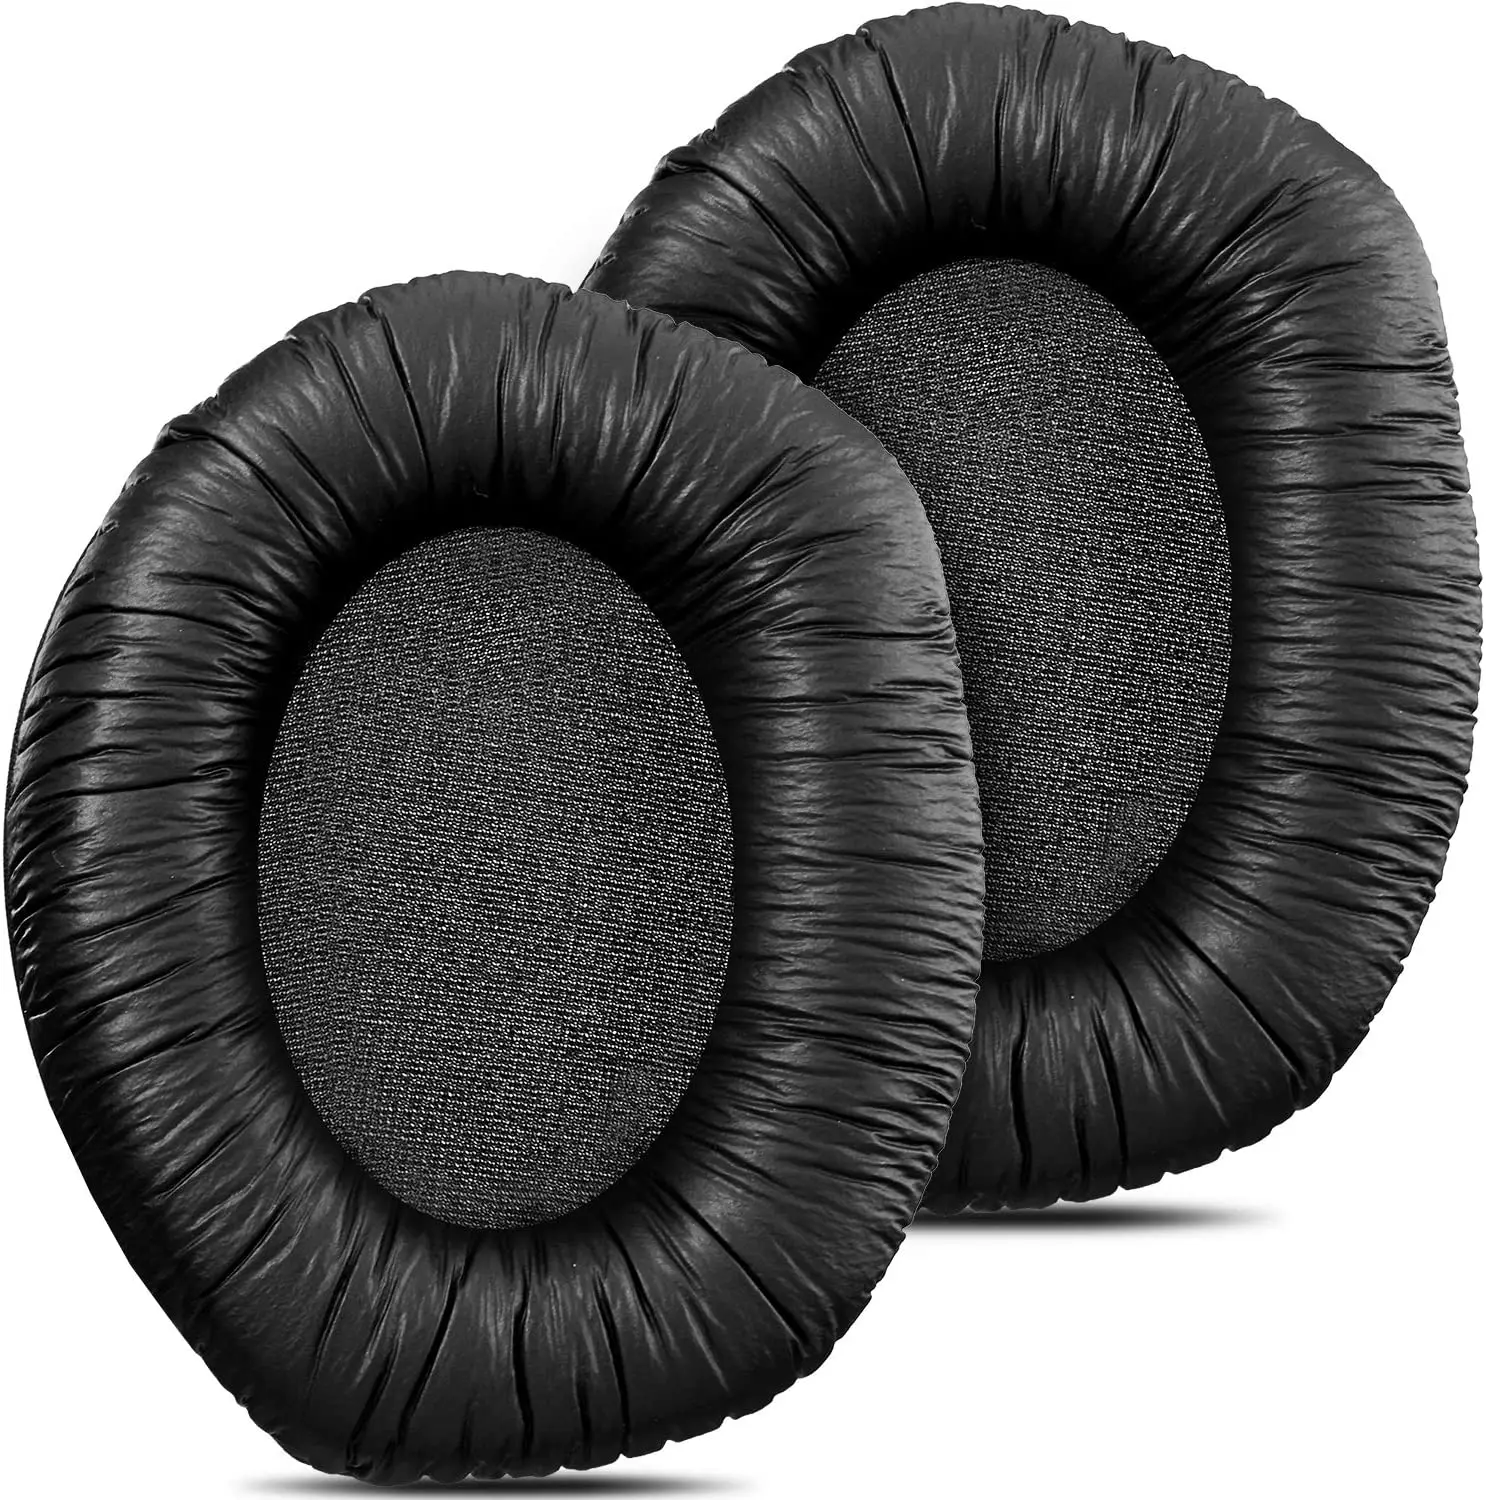 

Replacement Ear Pads Cushions Compatible with Sennheiser RS165, RS175, RS185, RS195, HDR165, HDR175, HDR185, HDR195 Headphones